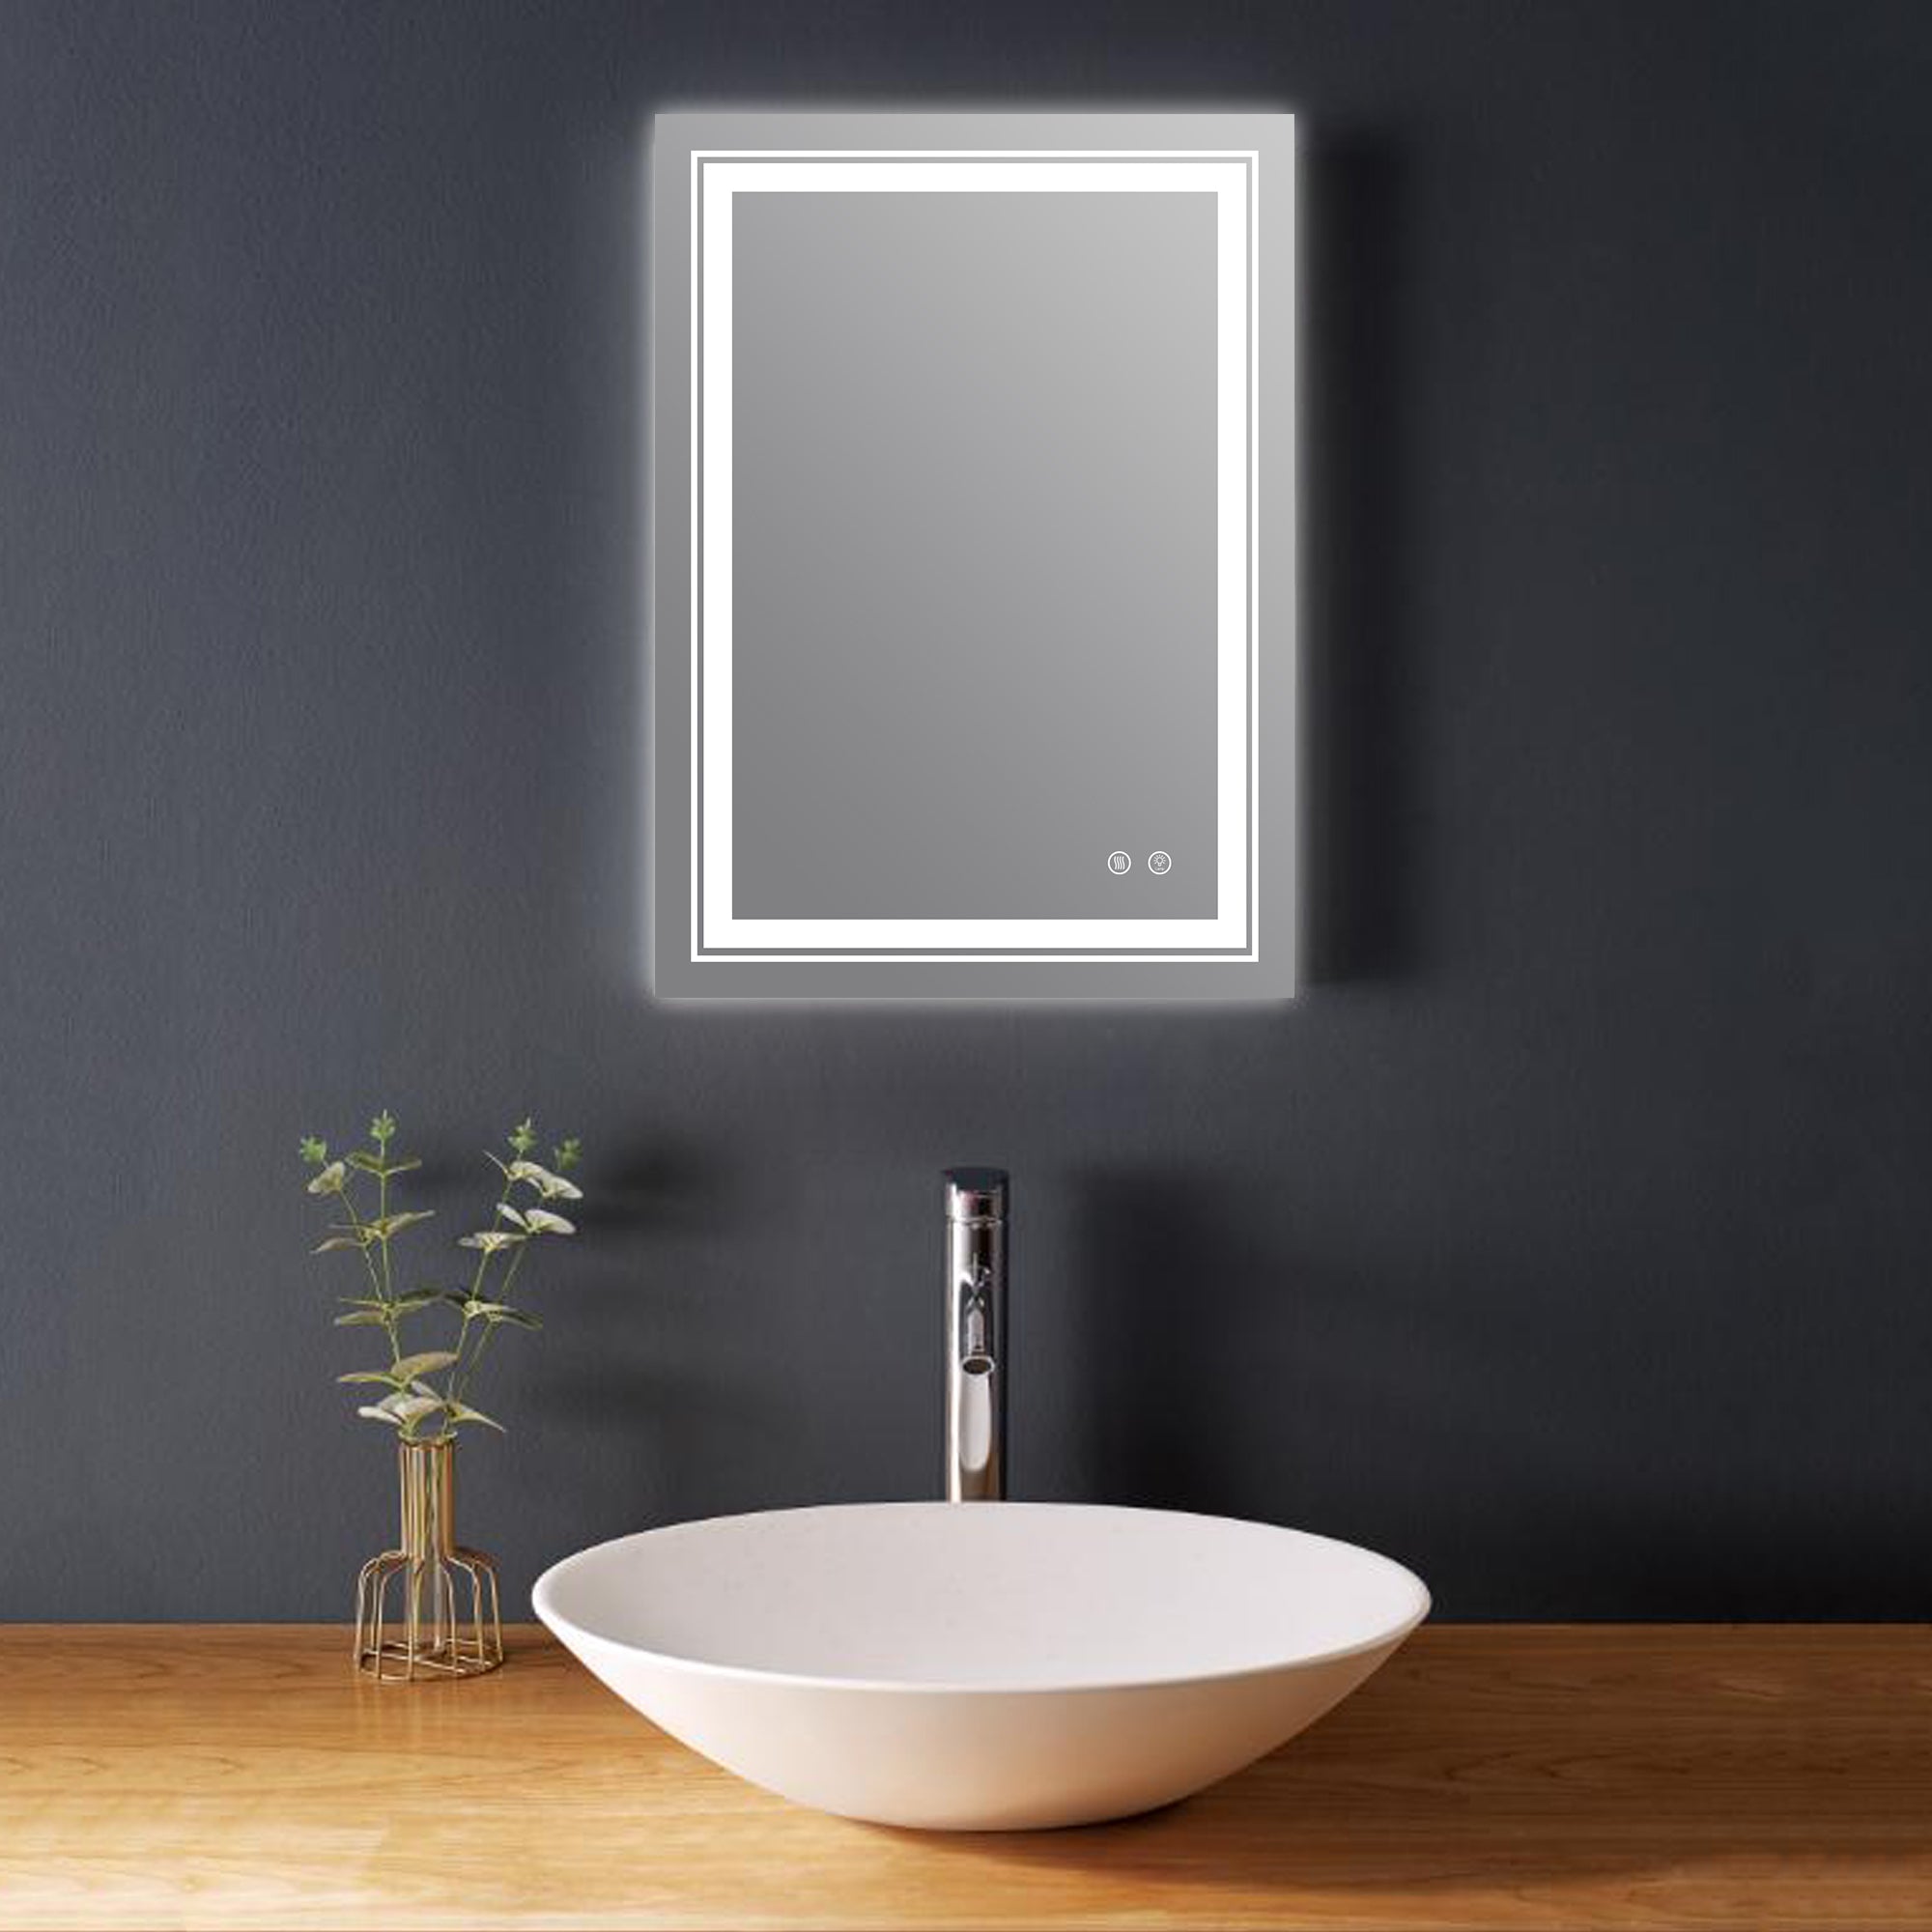 32 x 24 inch Bathroom silver mirrors with adjustable lights Anti-fog and water power menmory mirrors-Boyel Living